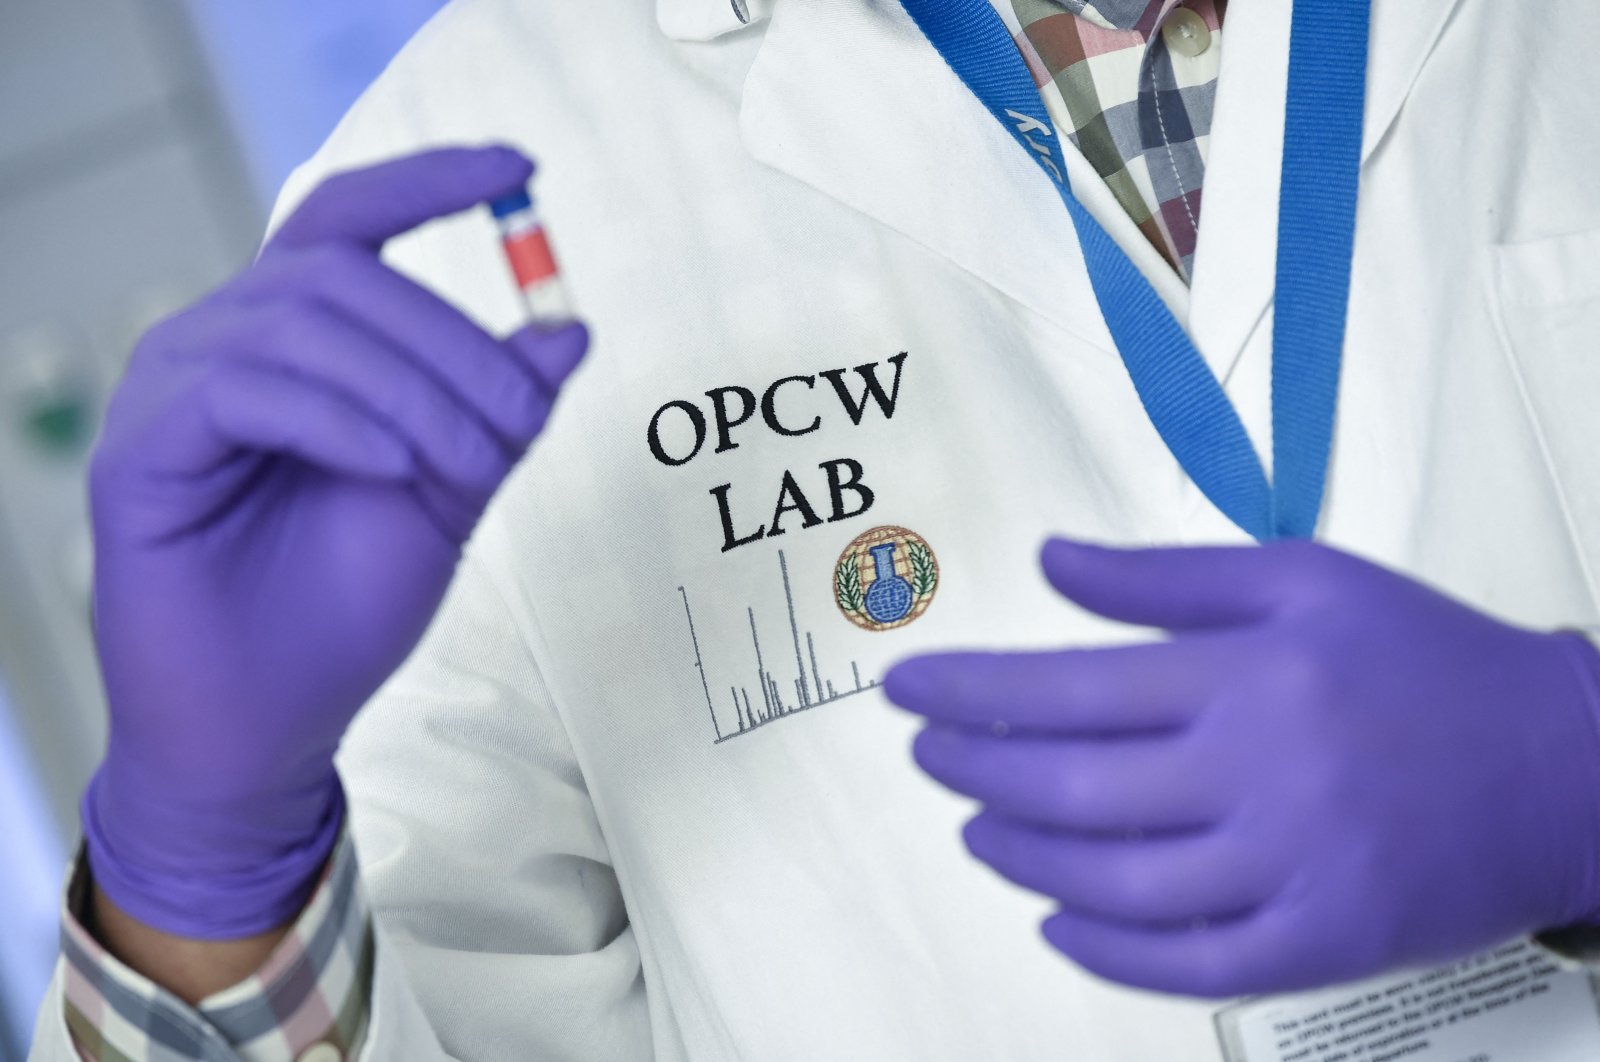 A laboratory technician inspects a test vial at the OPCW (The Organisation for the Prohibition of Chemical Weapons) headquarters in The Hague, Netherlands, April 20, 2018. (AFP Photo)